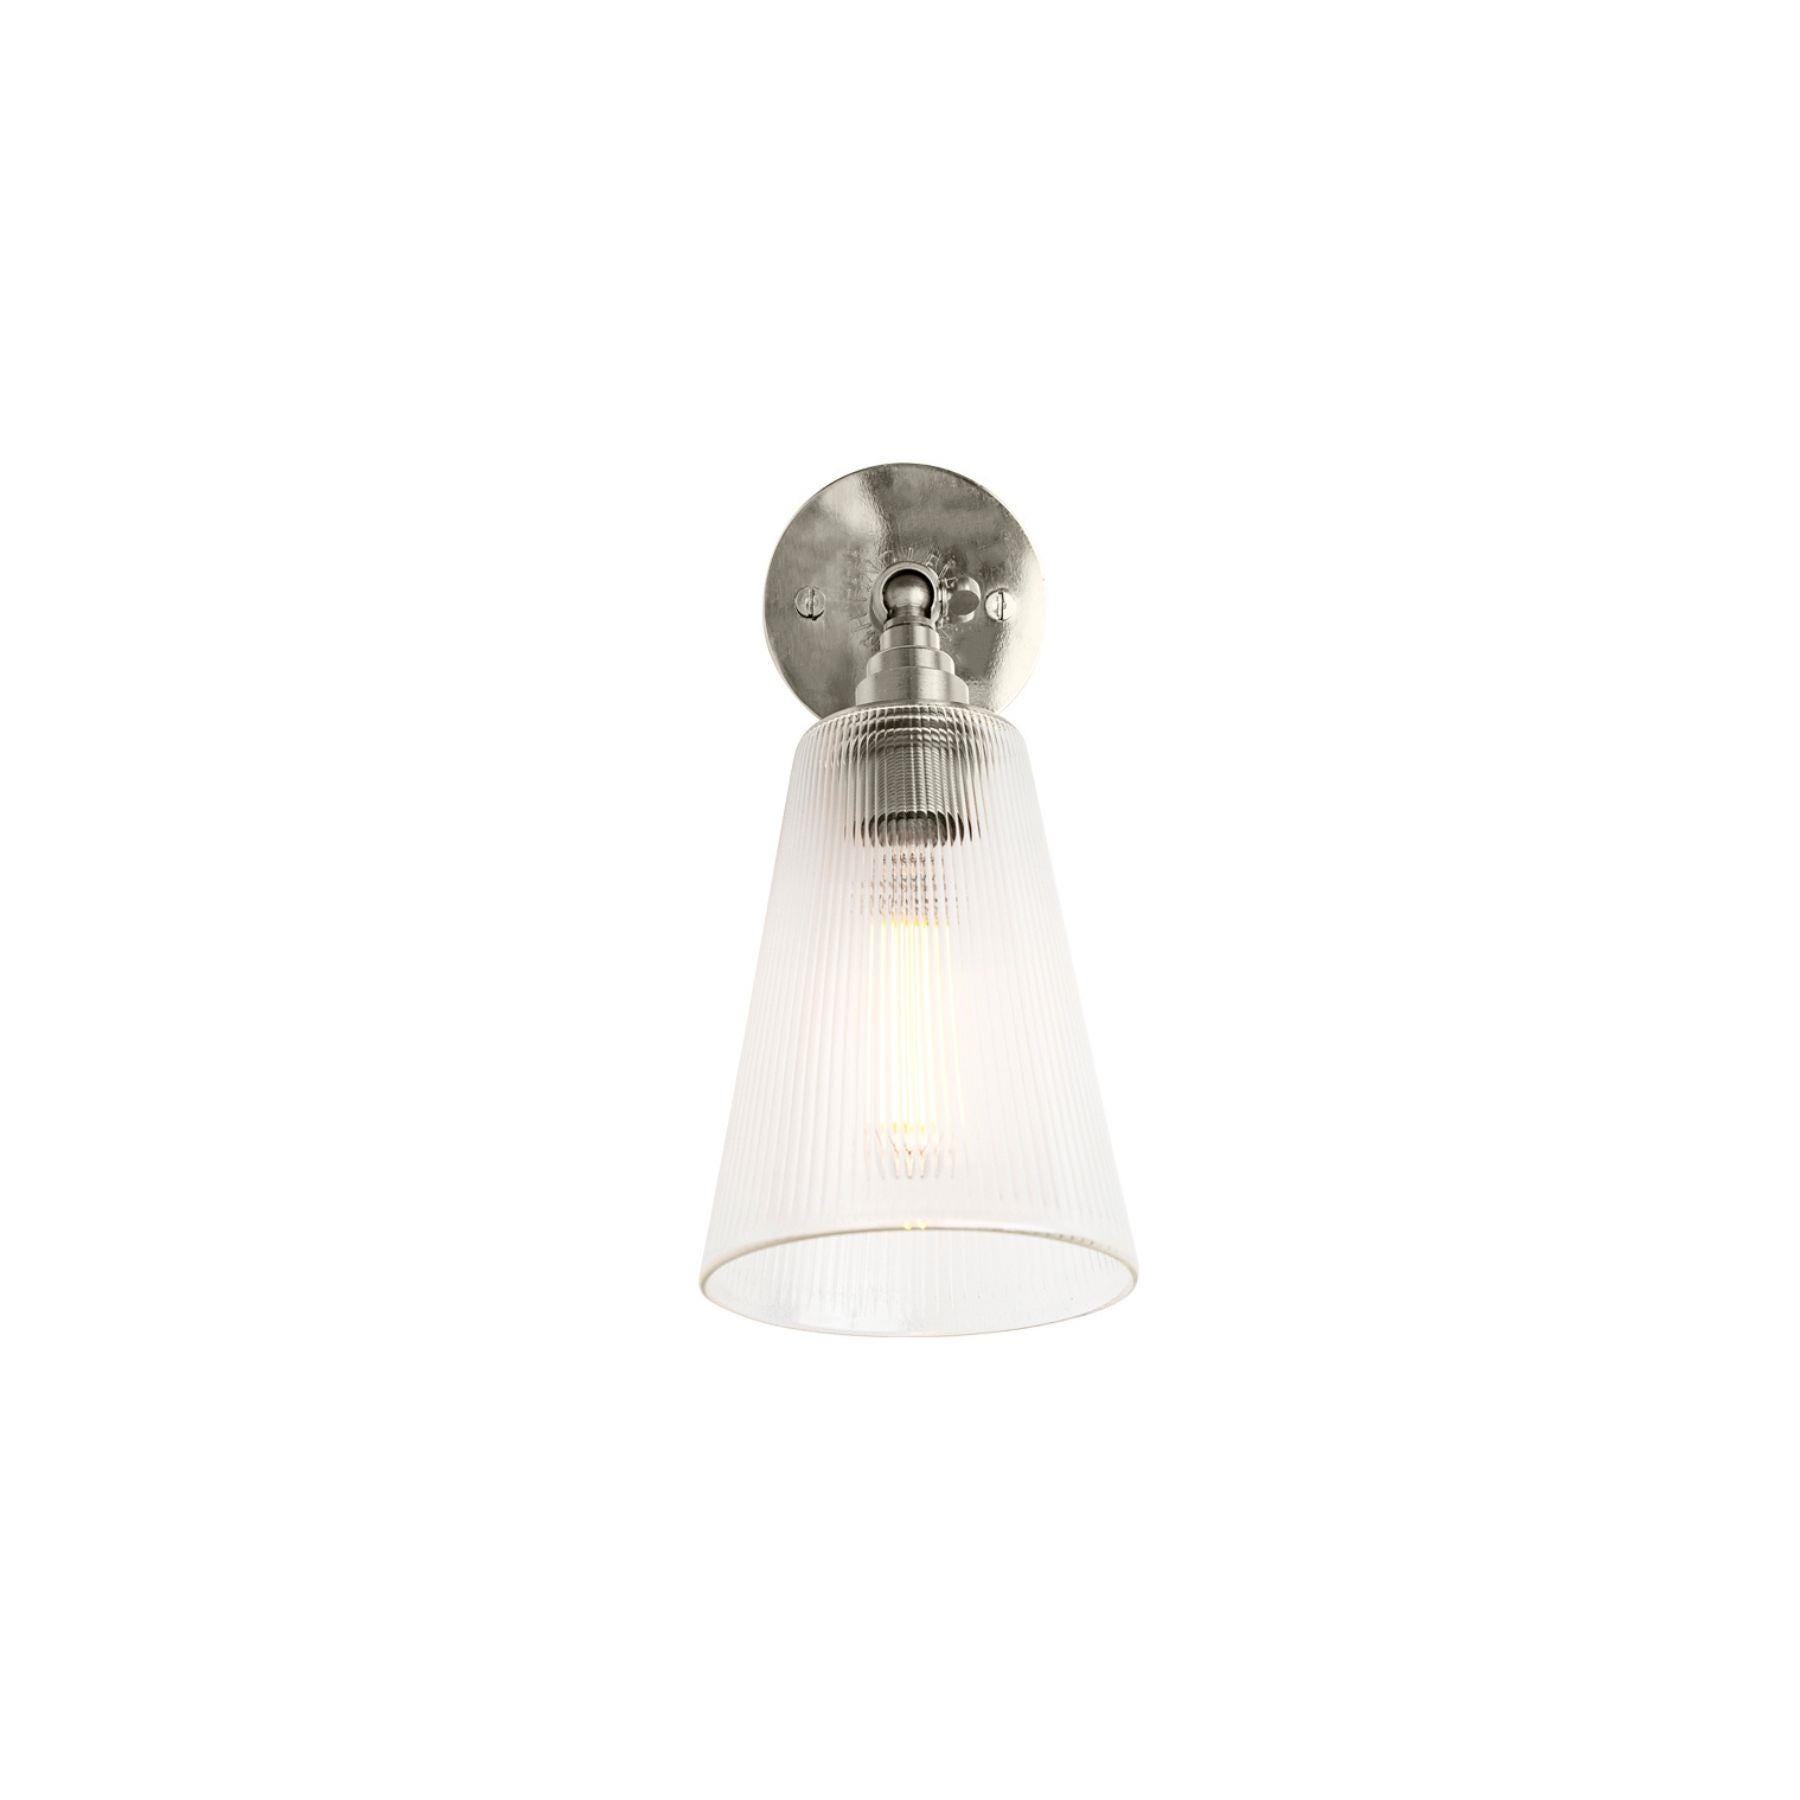 Leverint Camden Adjustable Wall Light Mini Opaque White Wall Lighting With Adjustable Arm